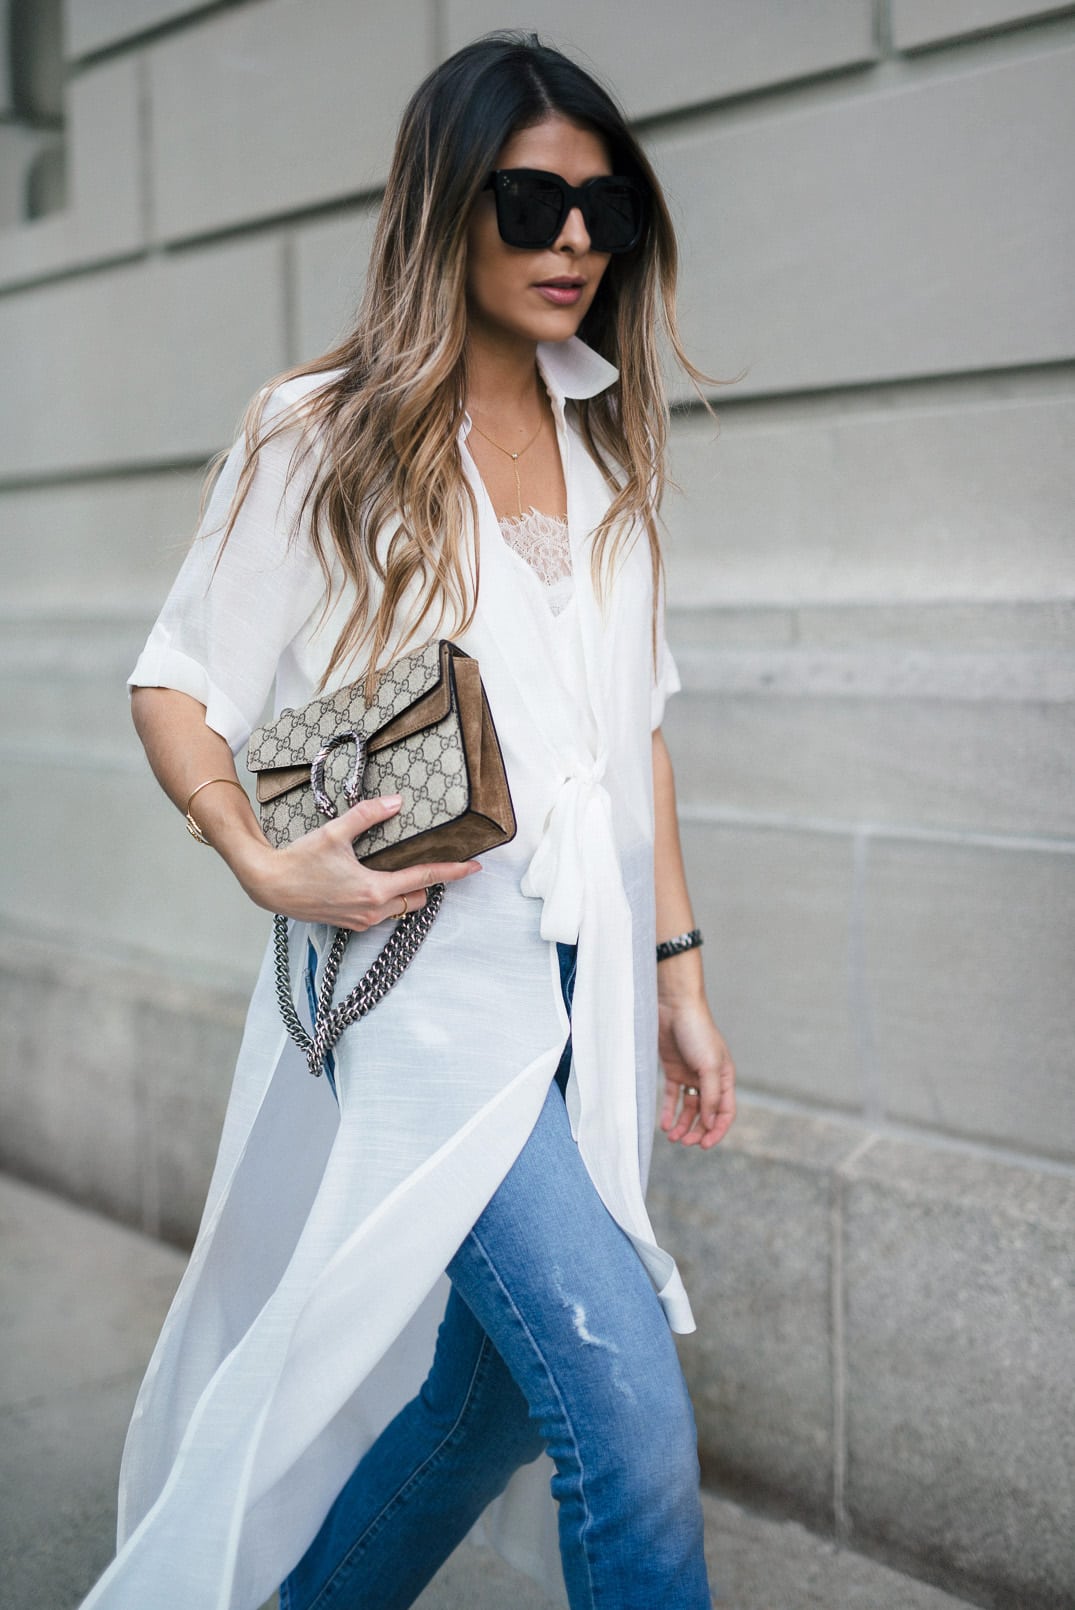 The Shirt Dress You Need Now - The Girl from Panama